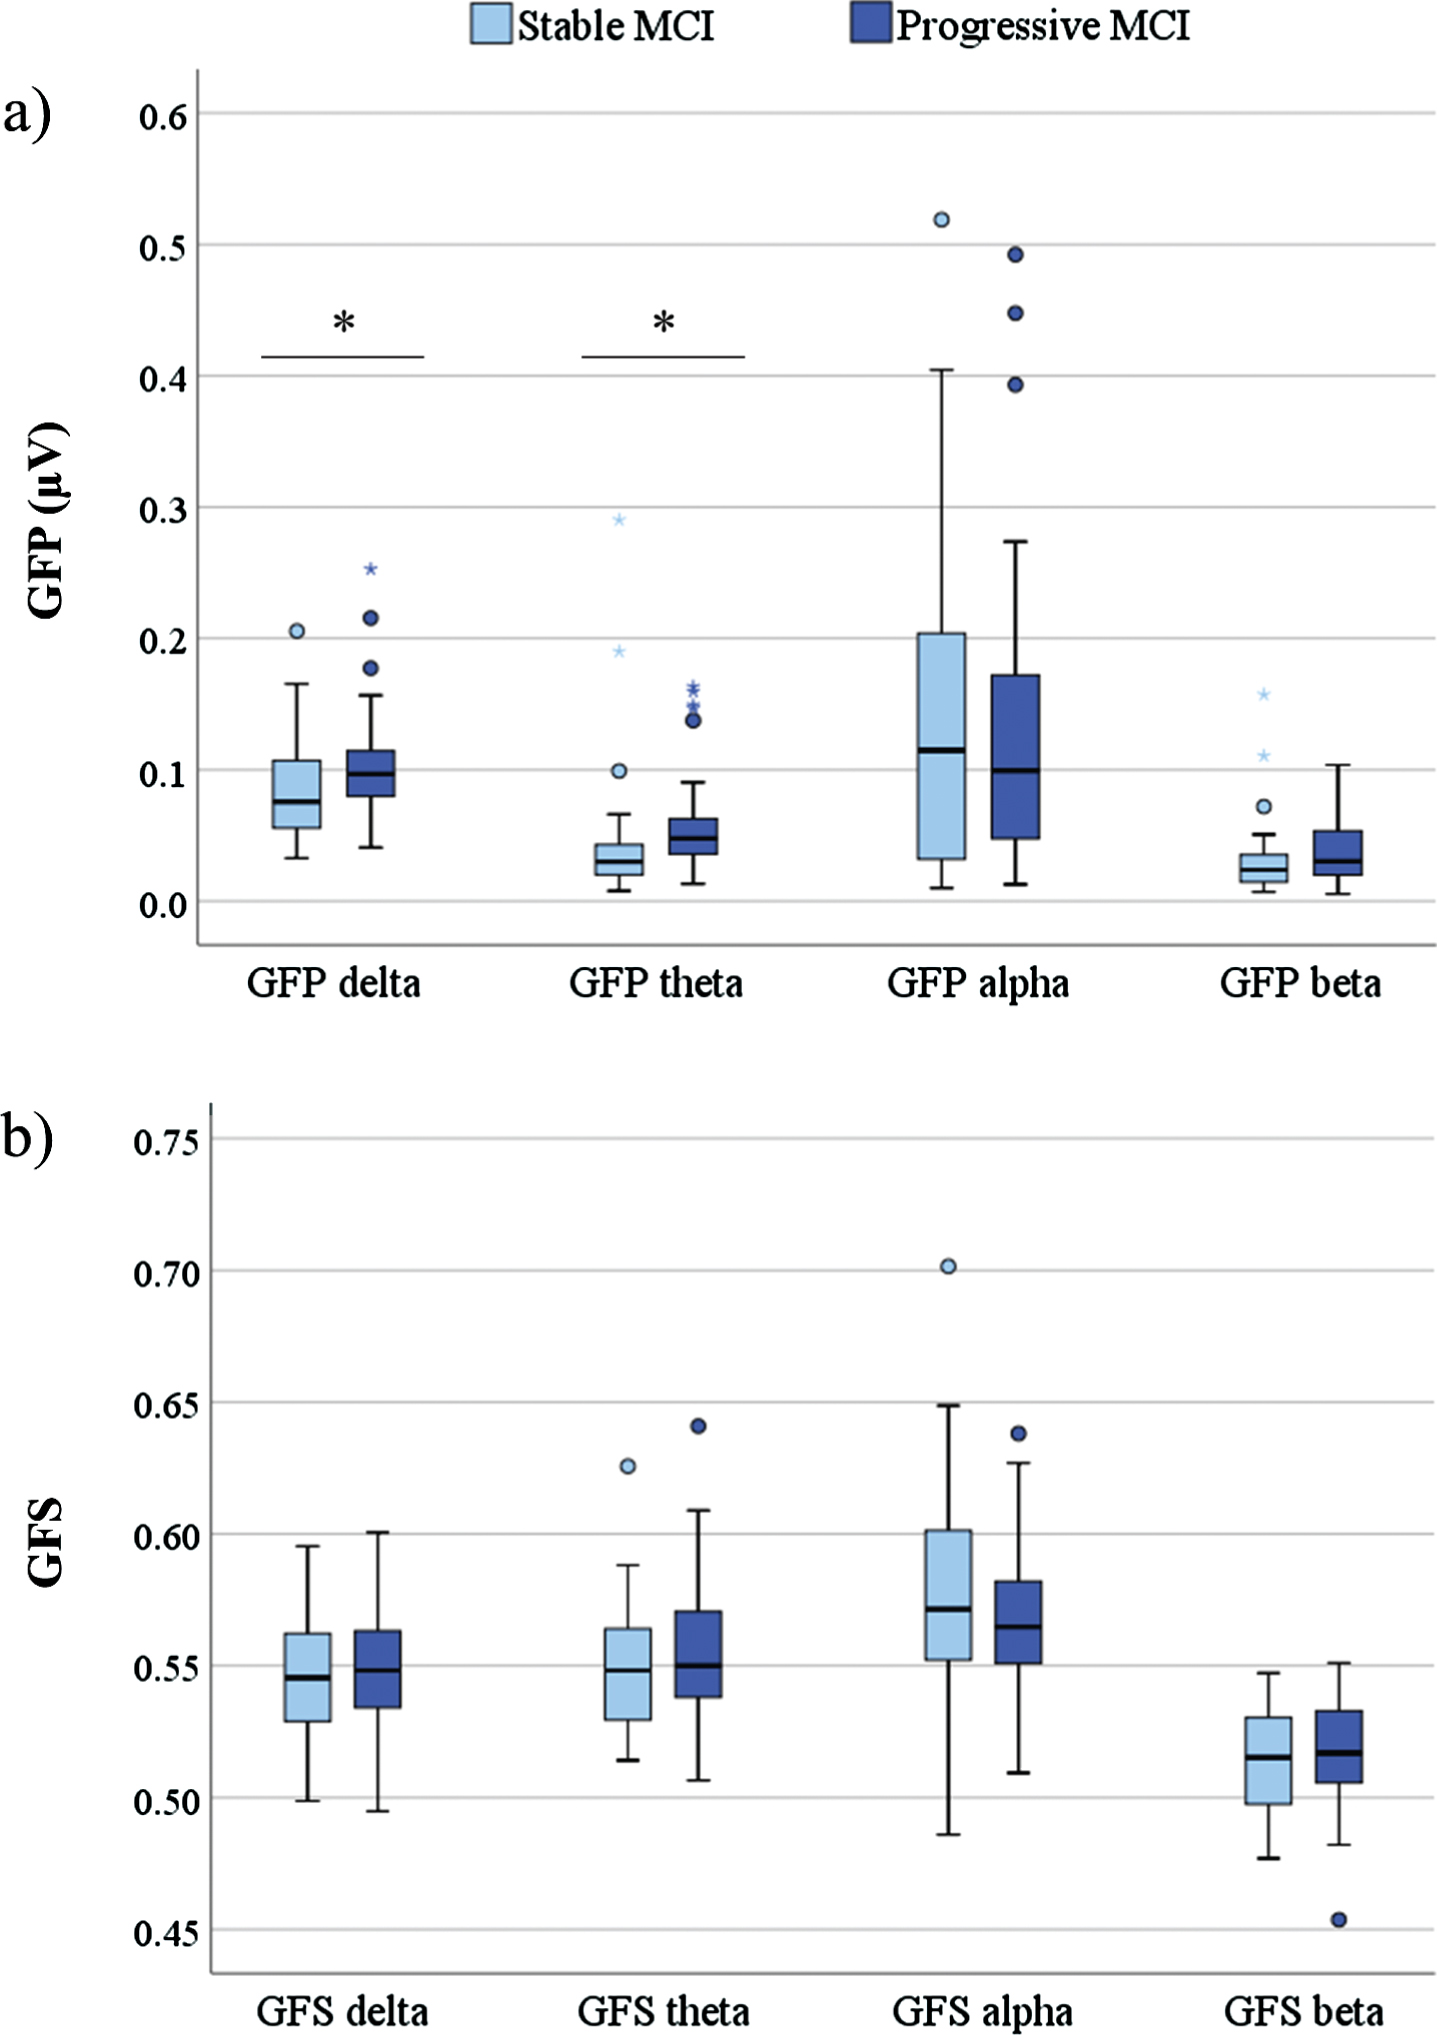 Box plot of baseline qEEG measures GFP (a) and GFS (b) (y-axis) across different frequency bands (x-axis) in stable and progressive MCI patients. Statistics were calculated using Independent sample t-test; *p < 0.05. GFP, global field power; GFS, global field synchronization; MCI, mild cognitive impairment.